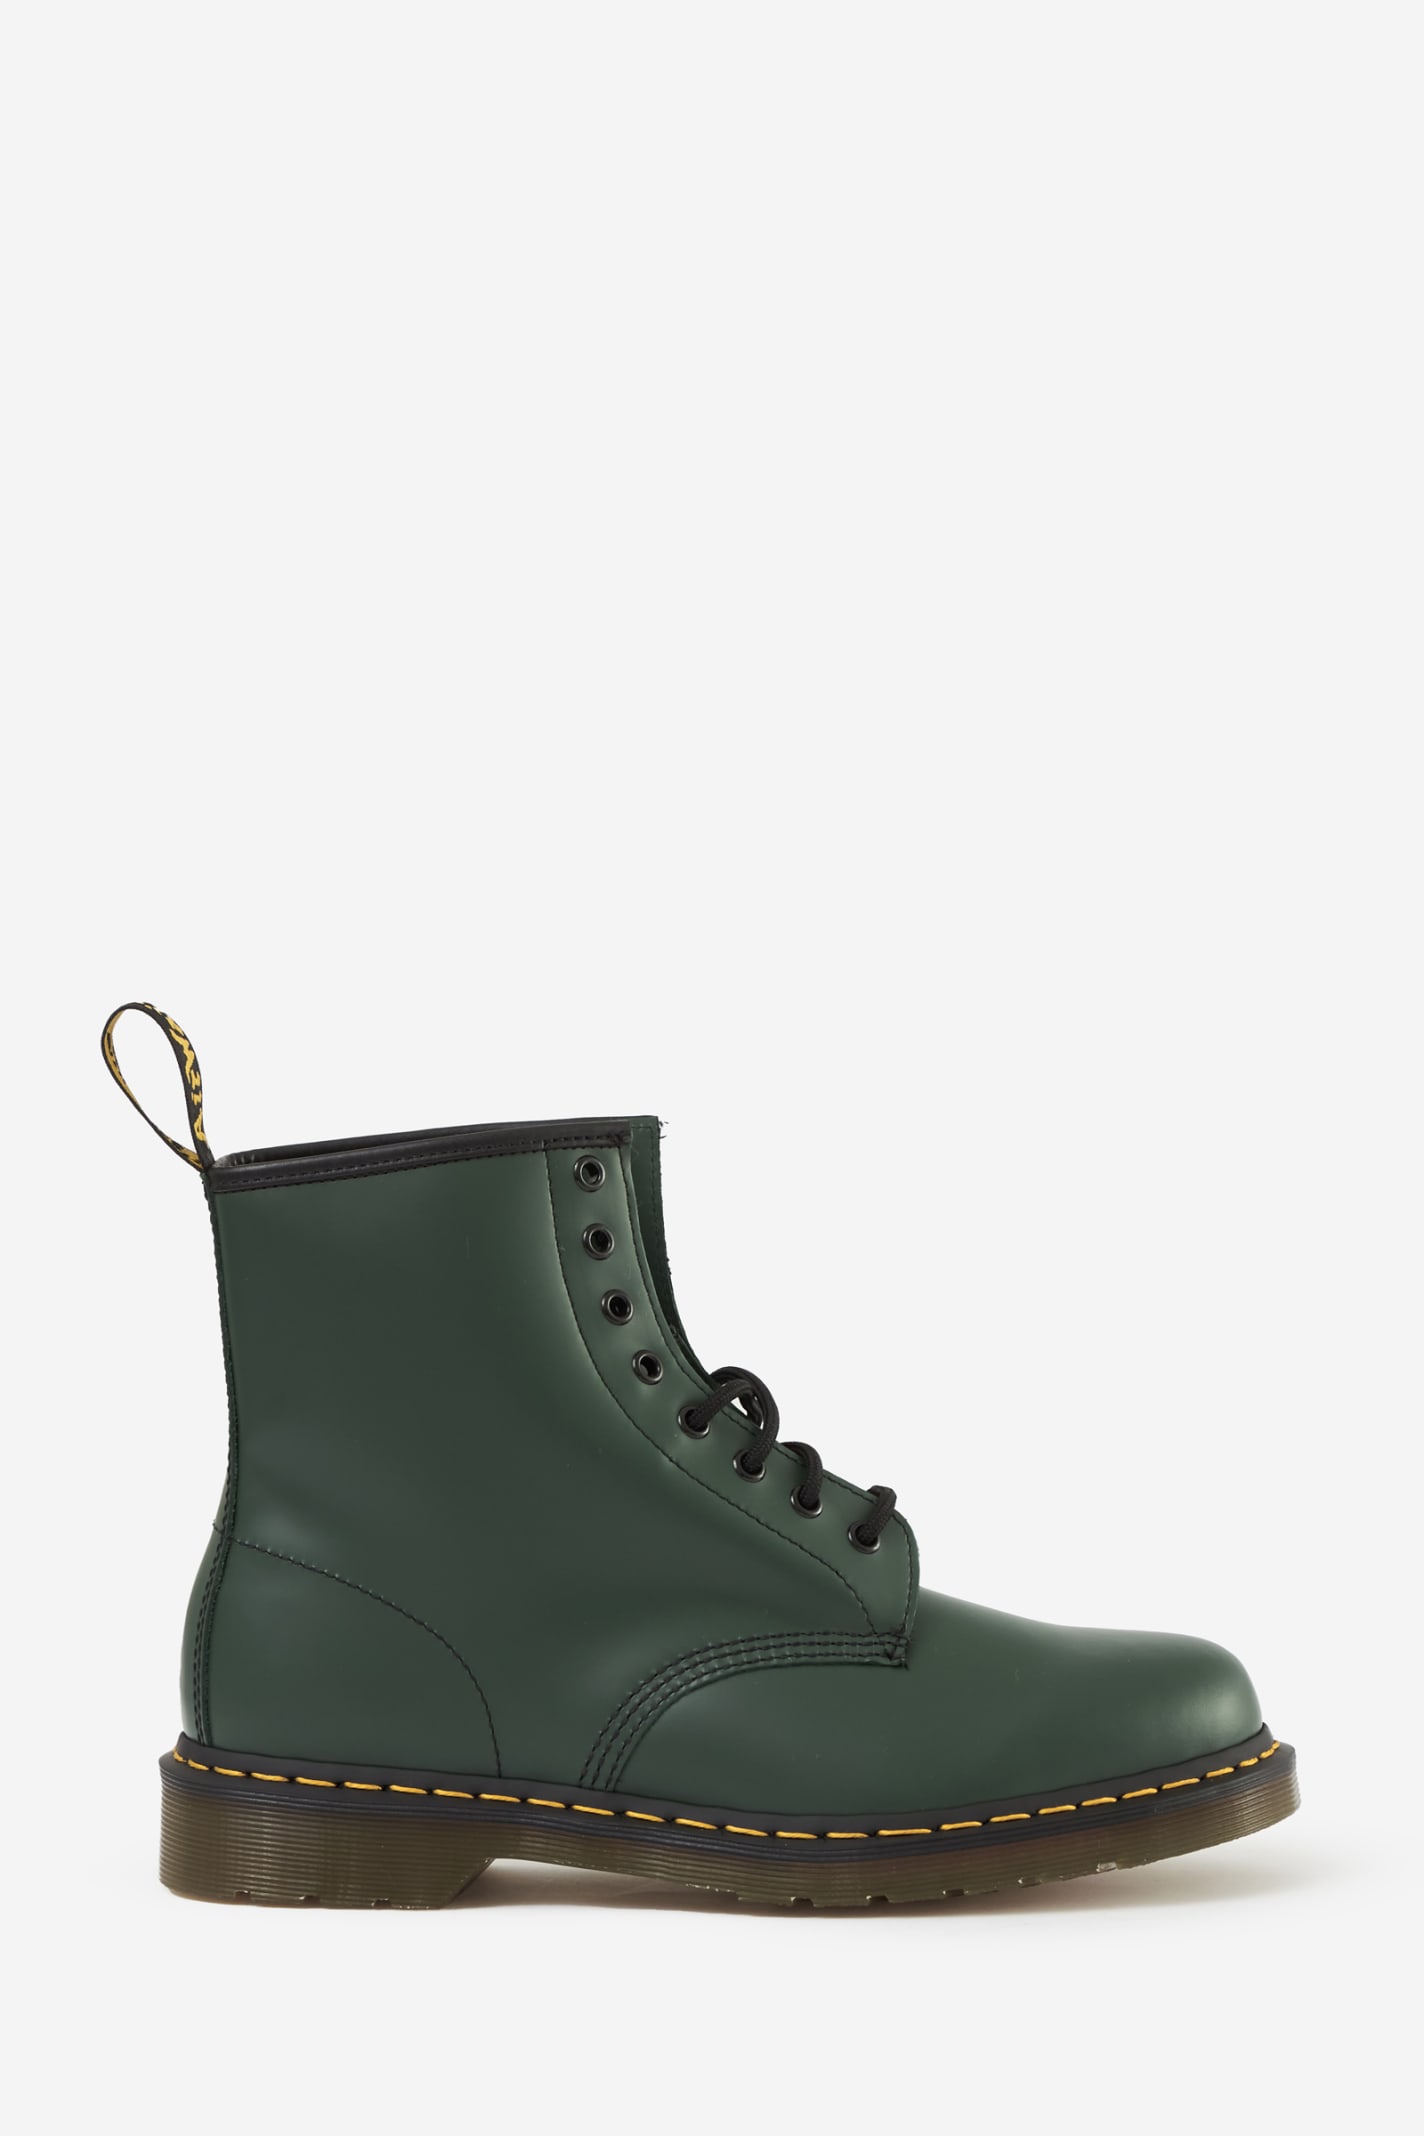 DR. MARTENS' 1460 SMOOTH COMBAT BOOTS